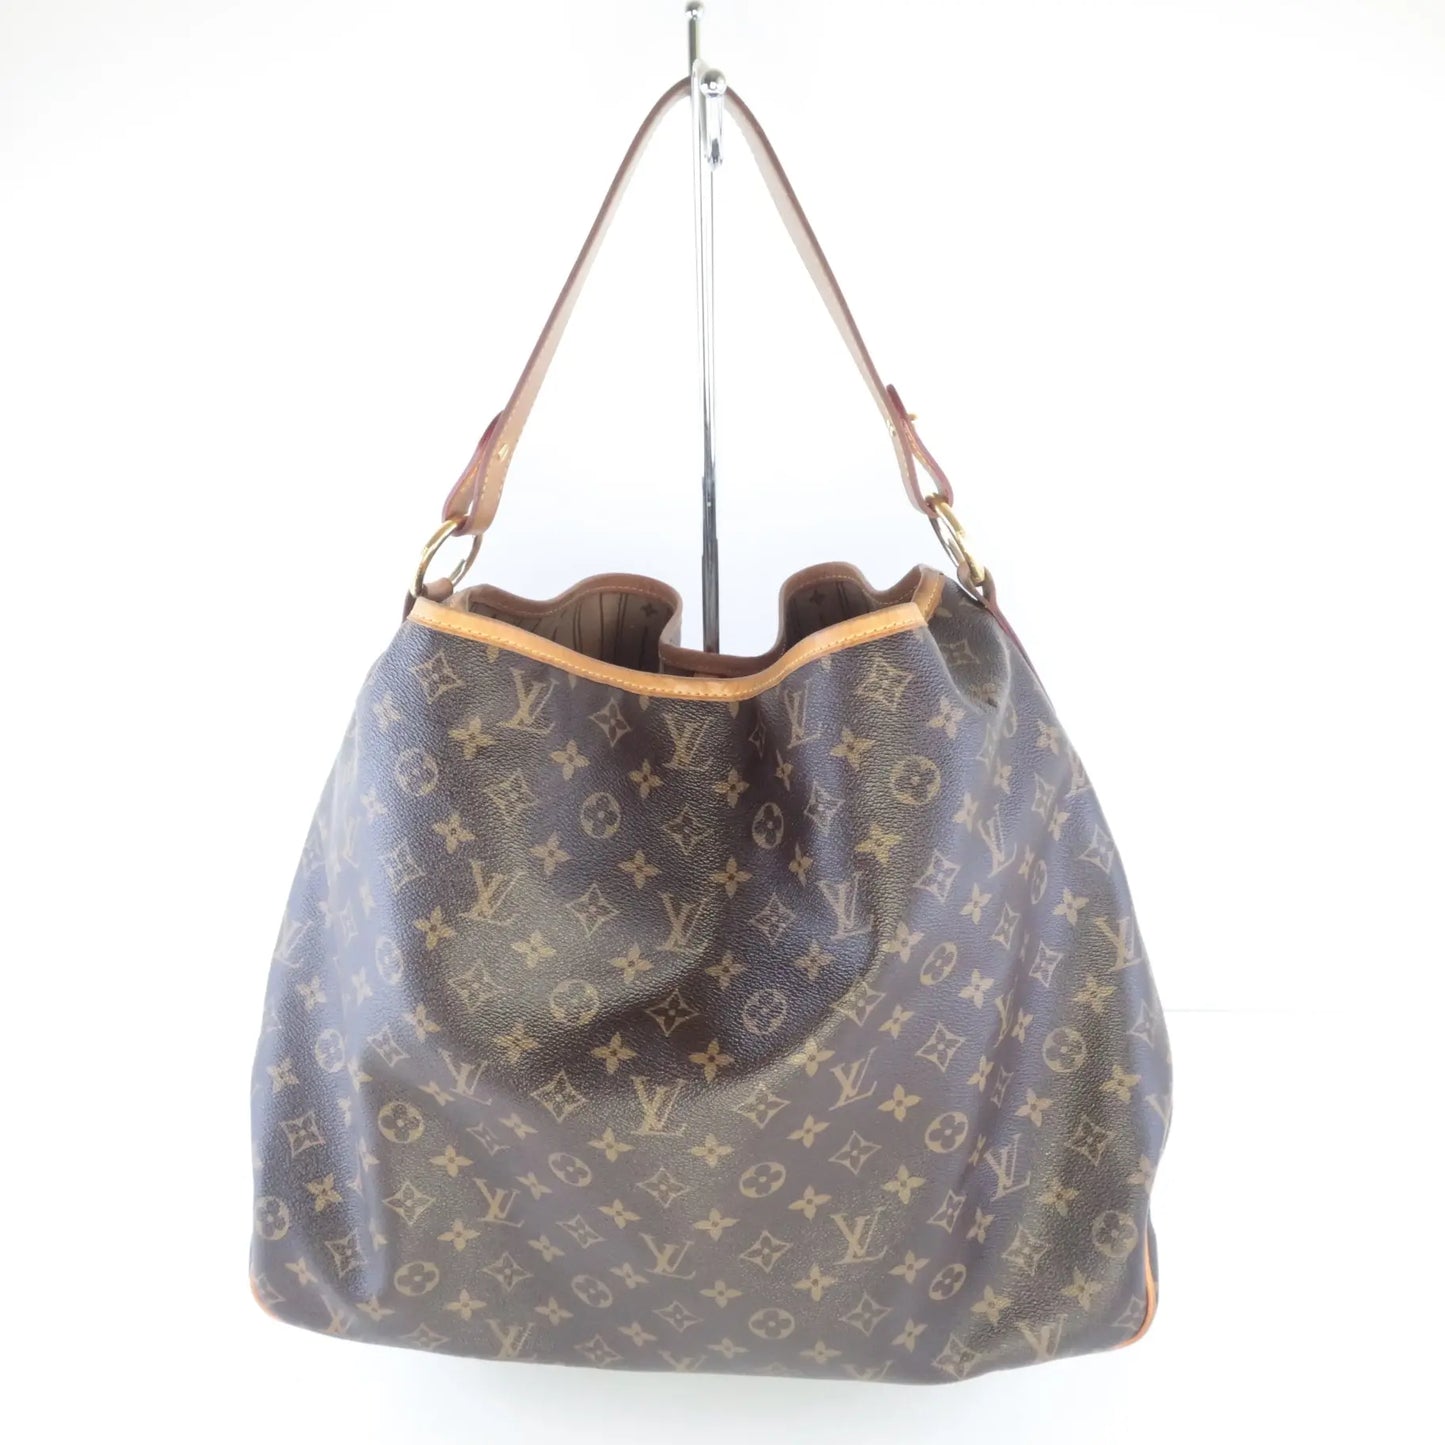 Load image into Gallery viewer, Louis Vuitton Louis Vuitton Monogram Canvas Delightful GM (with zippers) Shoulder Bag LVBagaholic
